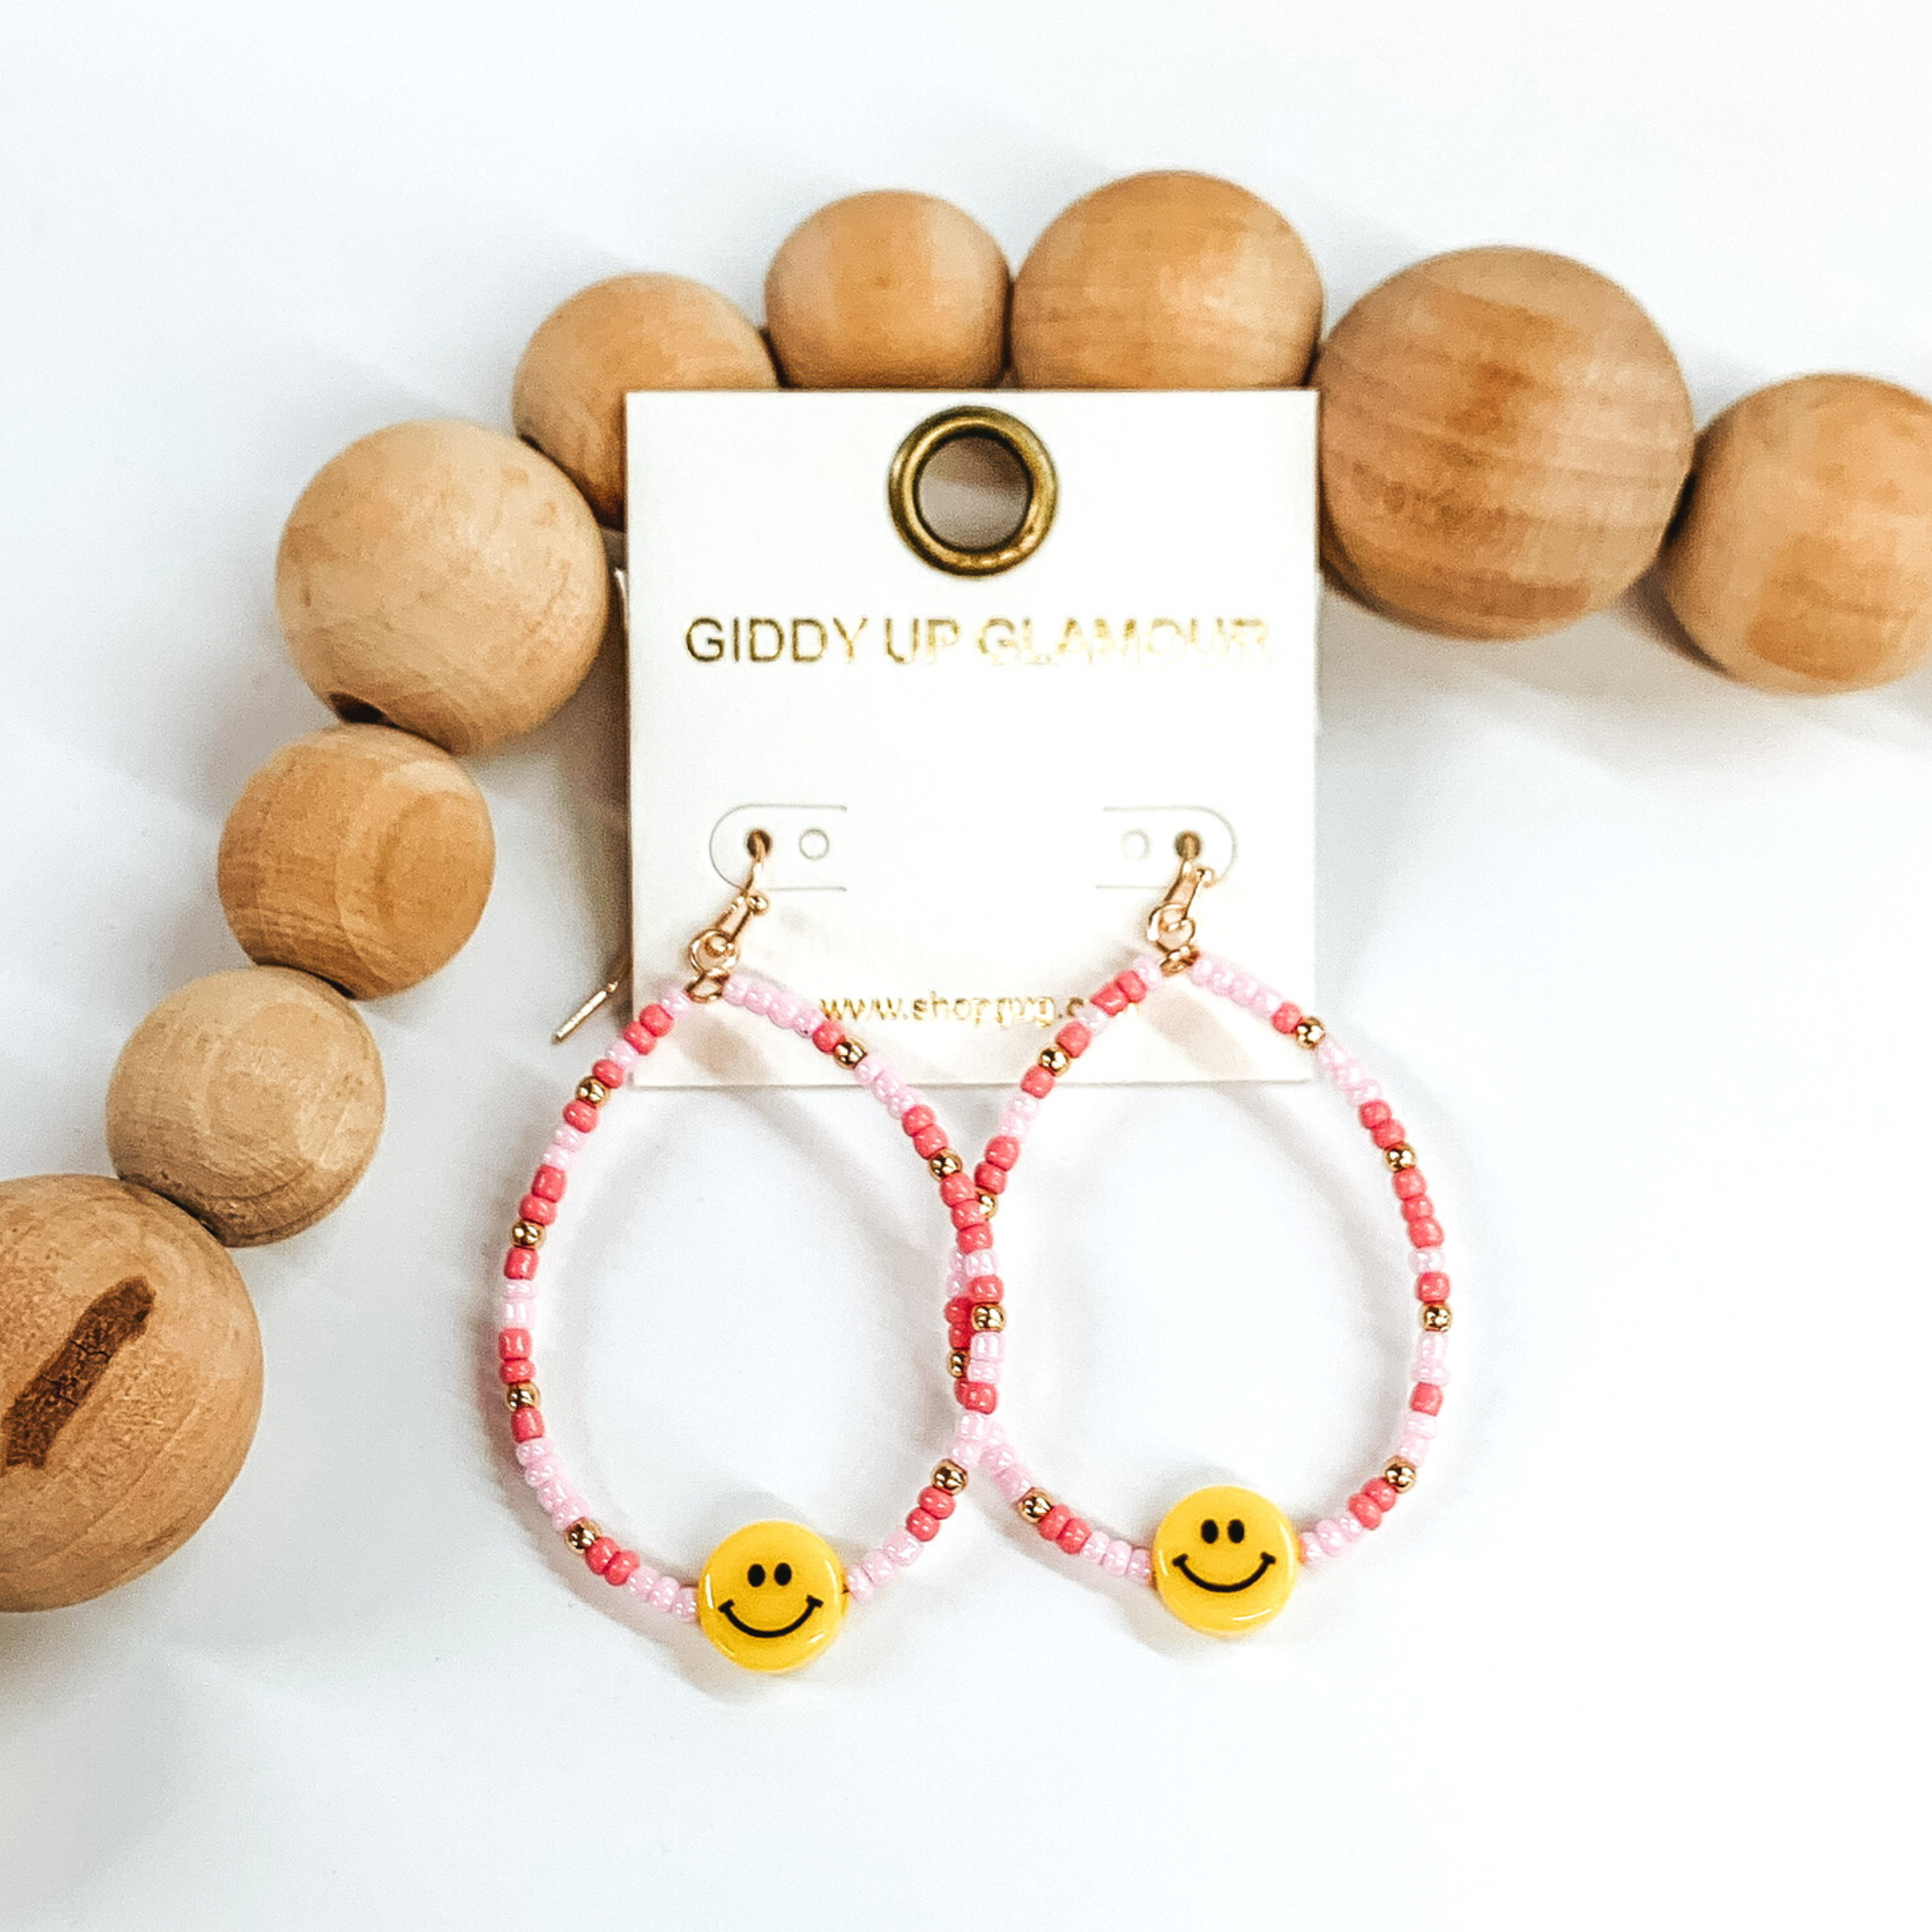 Hanging teardrop earrings with hanging yellow smiley faces. These earrings are covered in baby pink and pale pink beads with gold spacers. These earrings are pictured laying next to some tan beads on a white background.